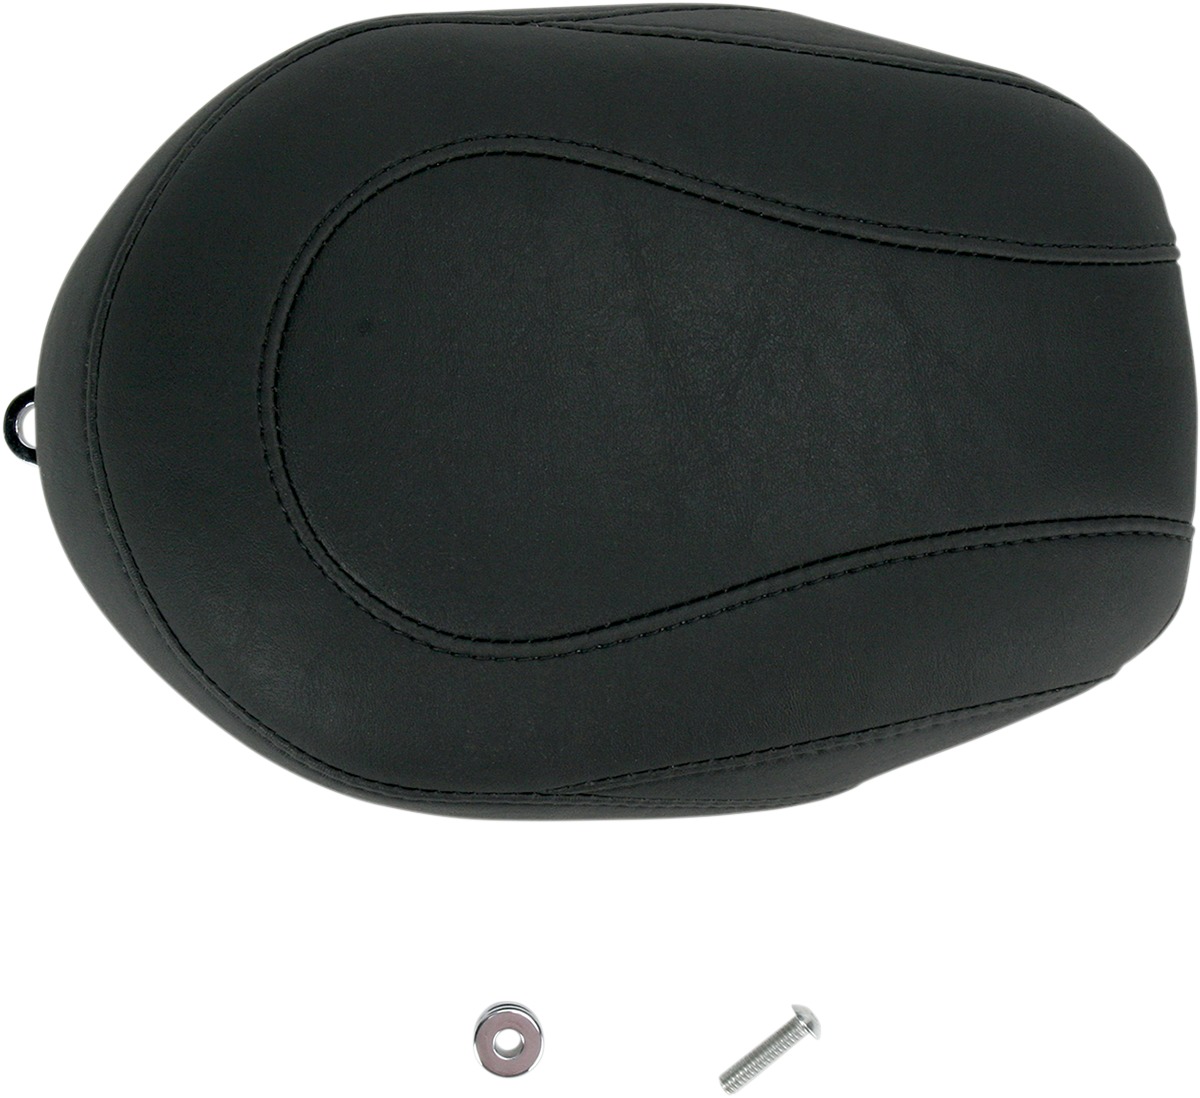 Tripper Stitched Synth. Leather Pillion Pad - Black - For 04-20 Harley XL XR - Click Image to Close